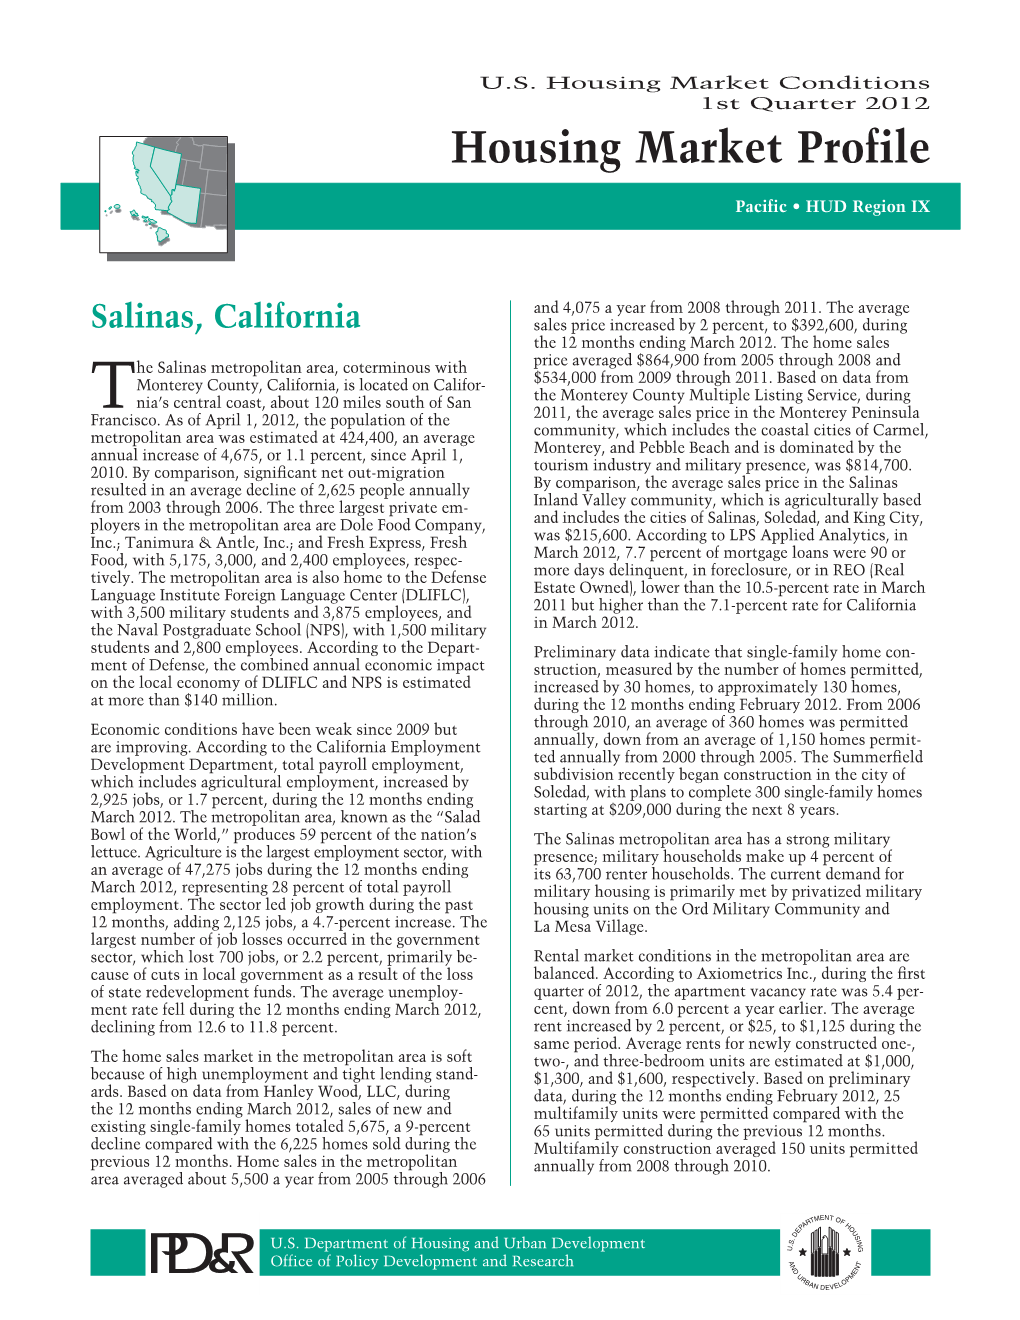 Salinas, California Sales Price Increased by 2 Percent, to $392,600, During the 12 Months Ending March 2012